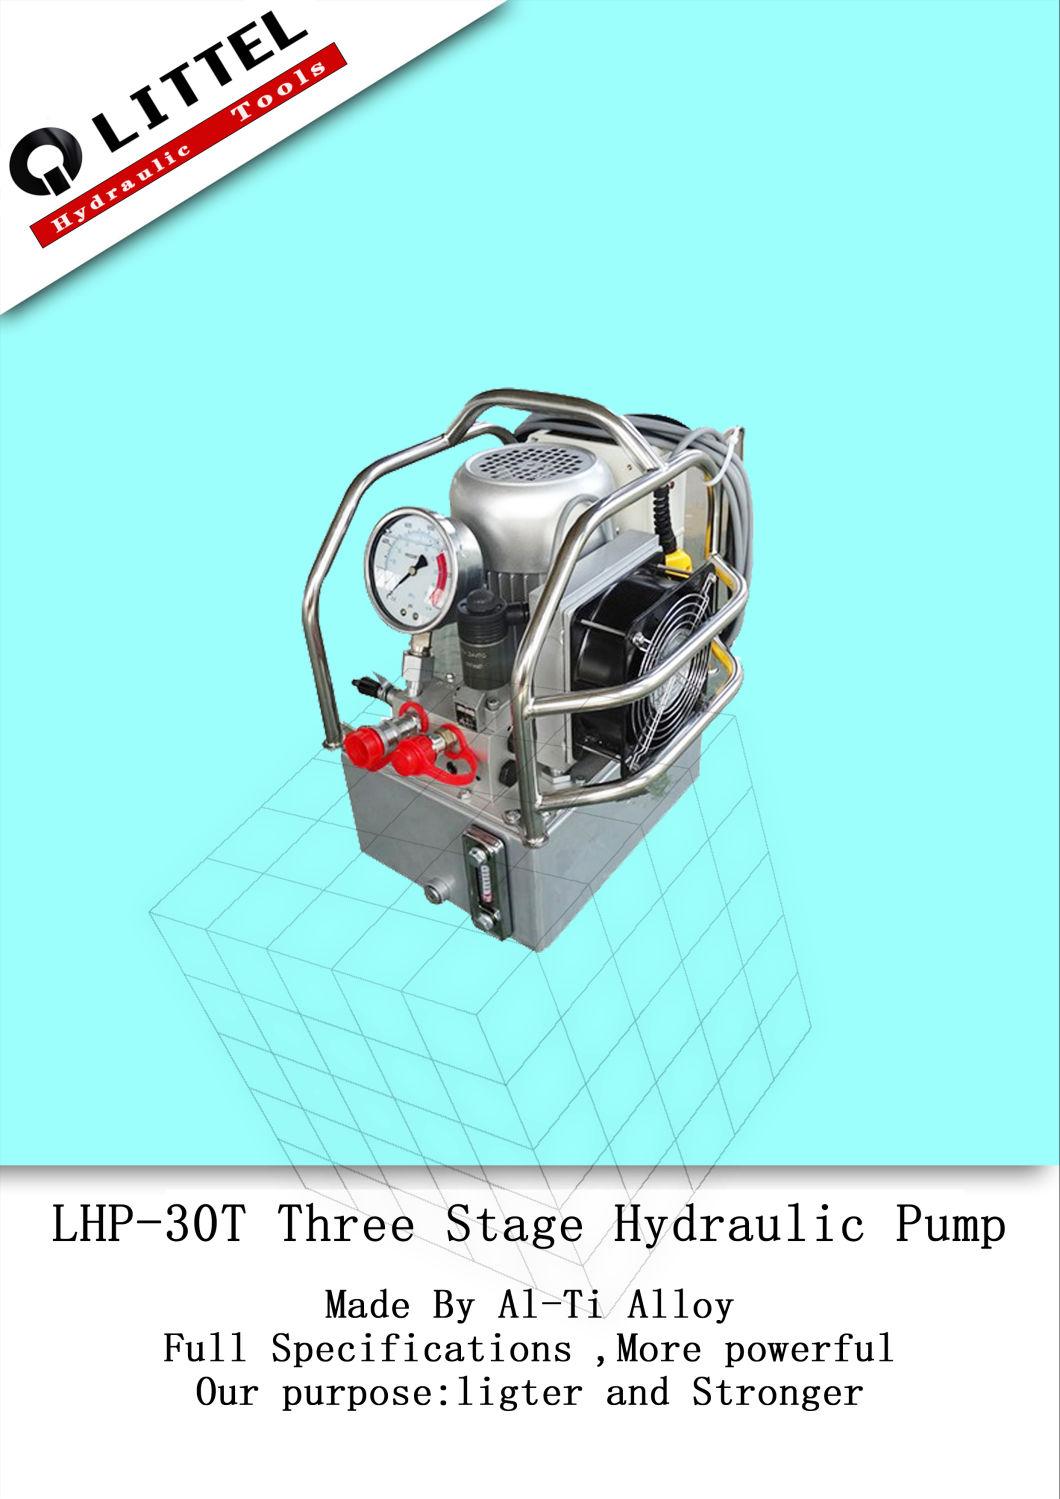 Lhp-30t Three Stage Hydraulic Pump for Hydraulic Wrench Sales by Manufacturer